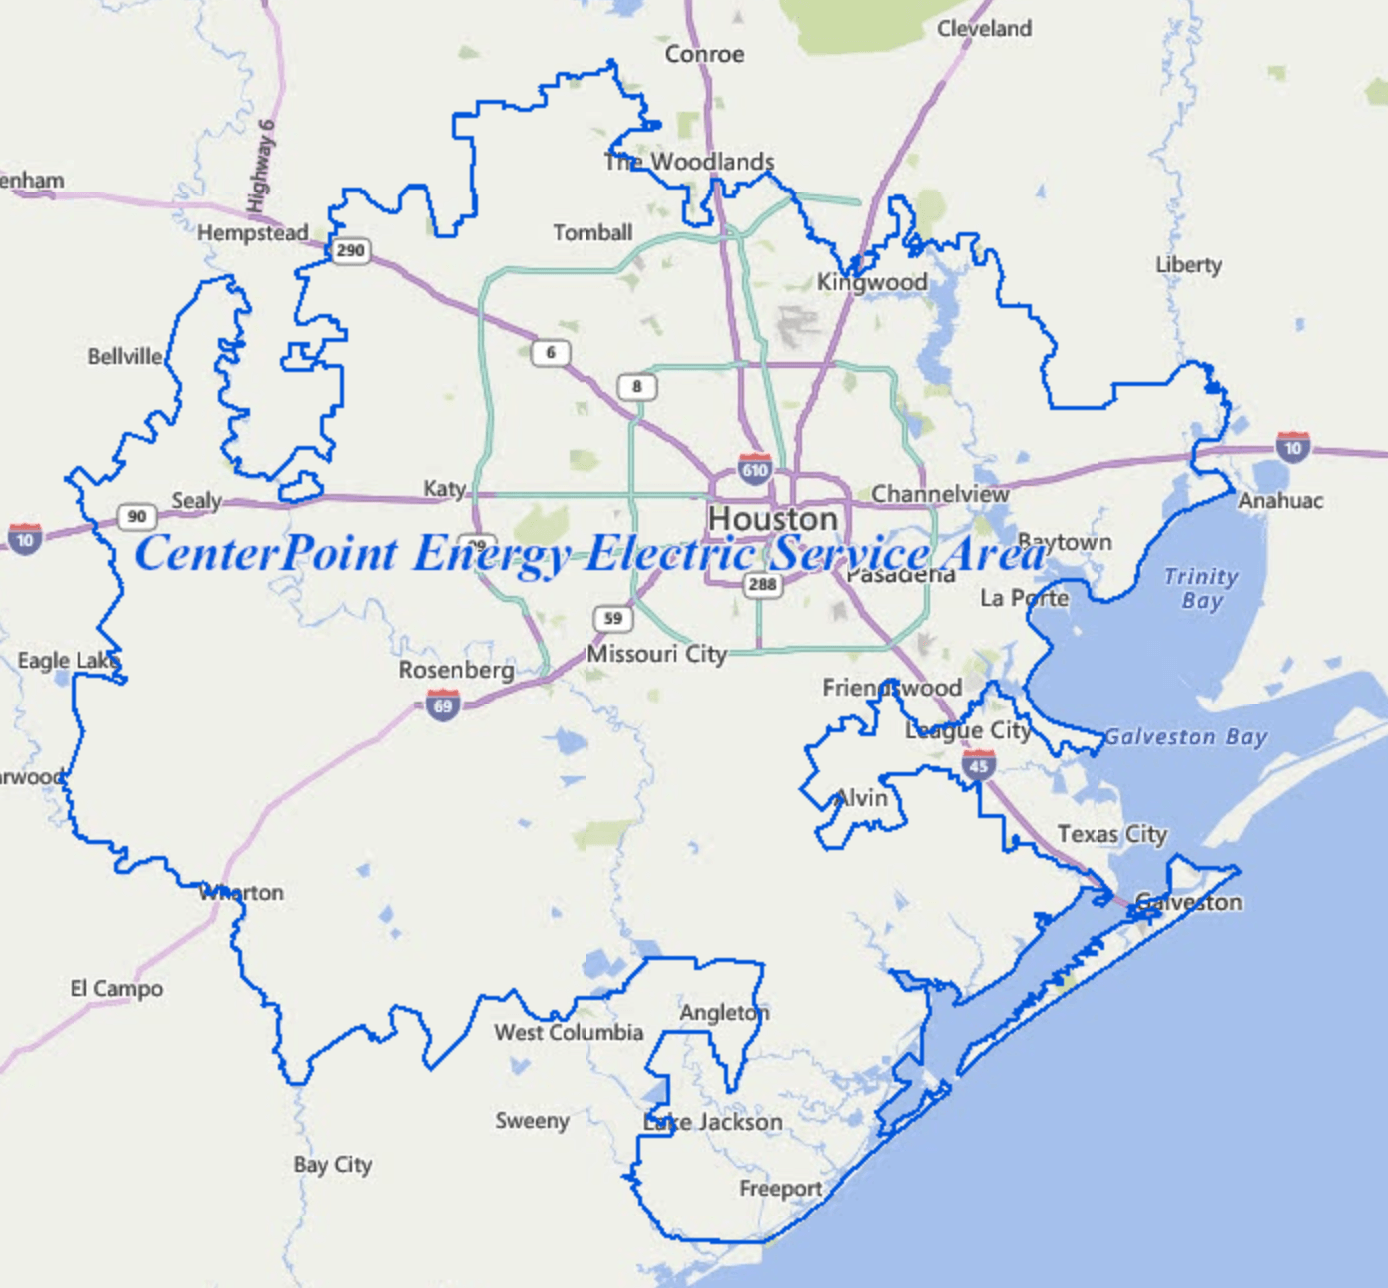 Centerpoint Energy Service Area Map Dxoim9axbzn97m You can find